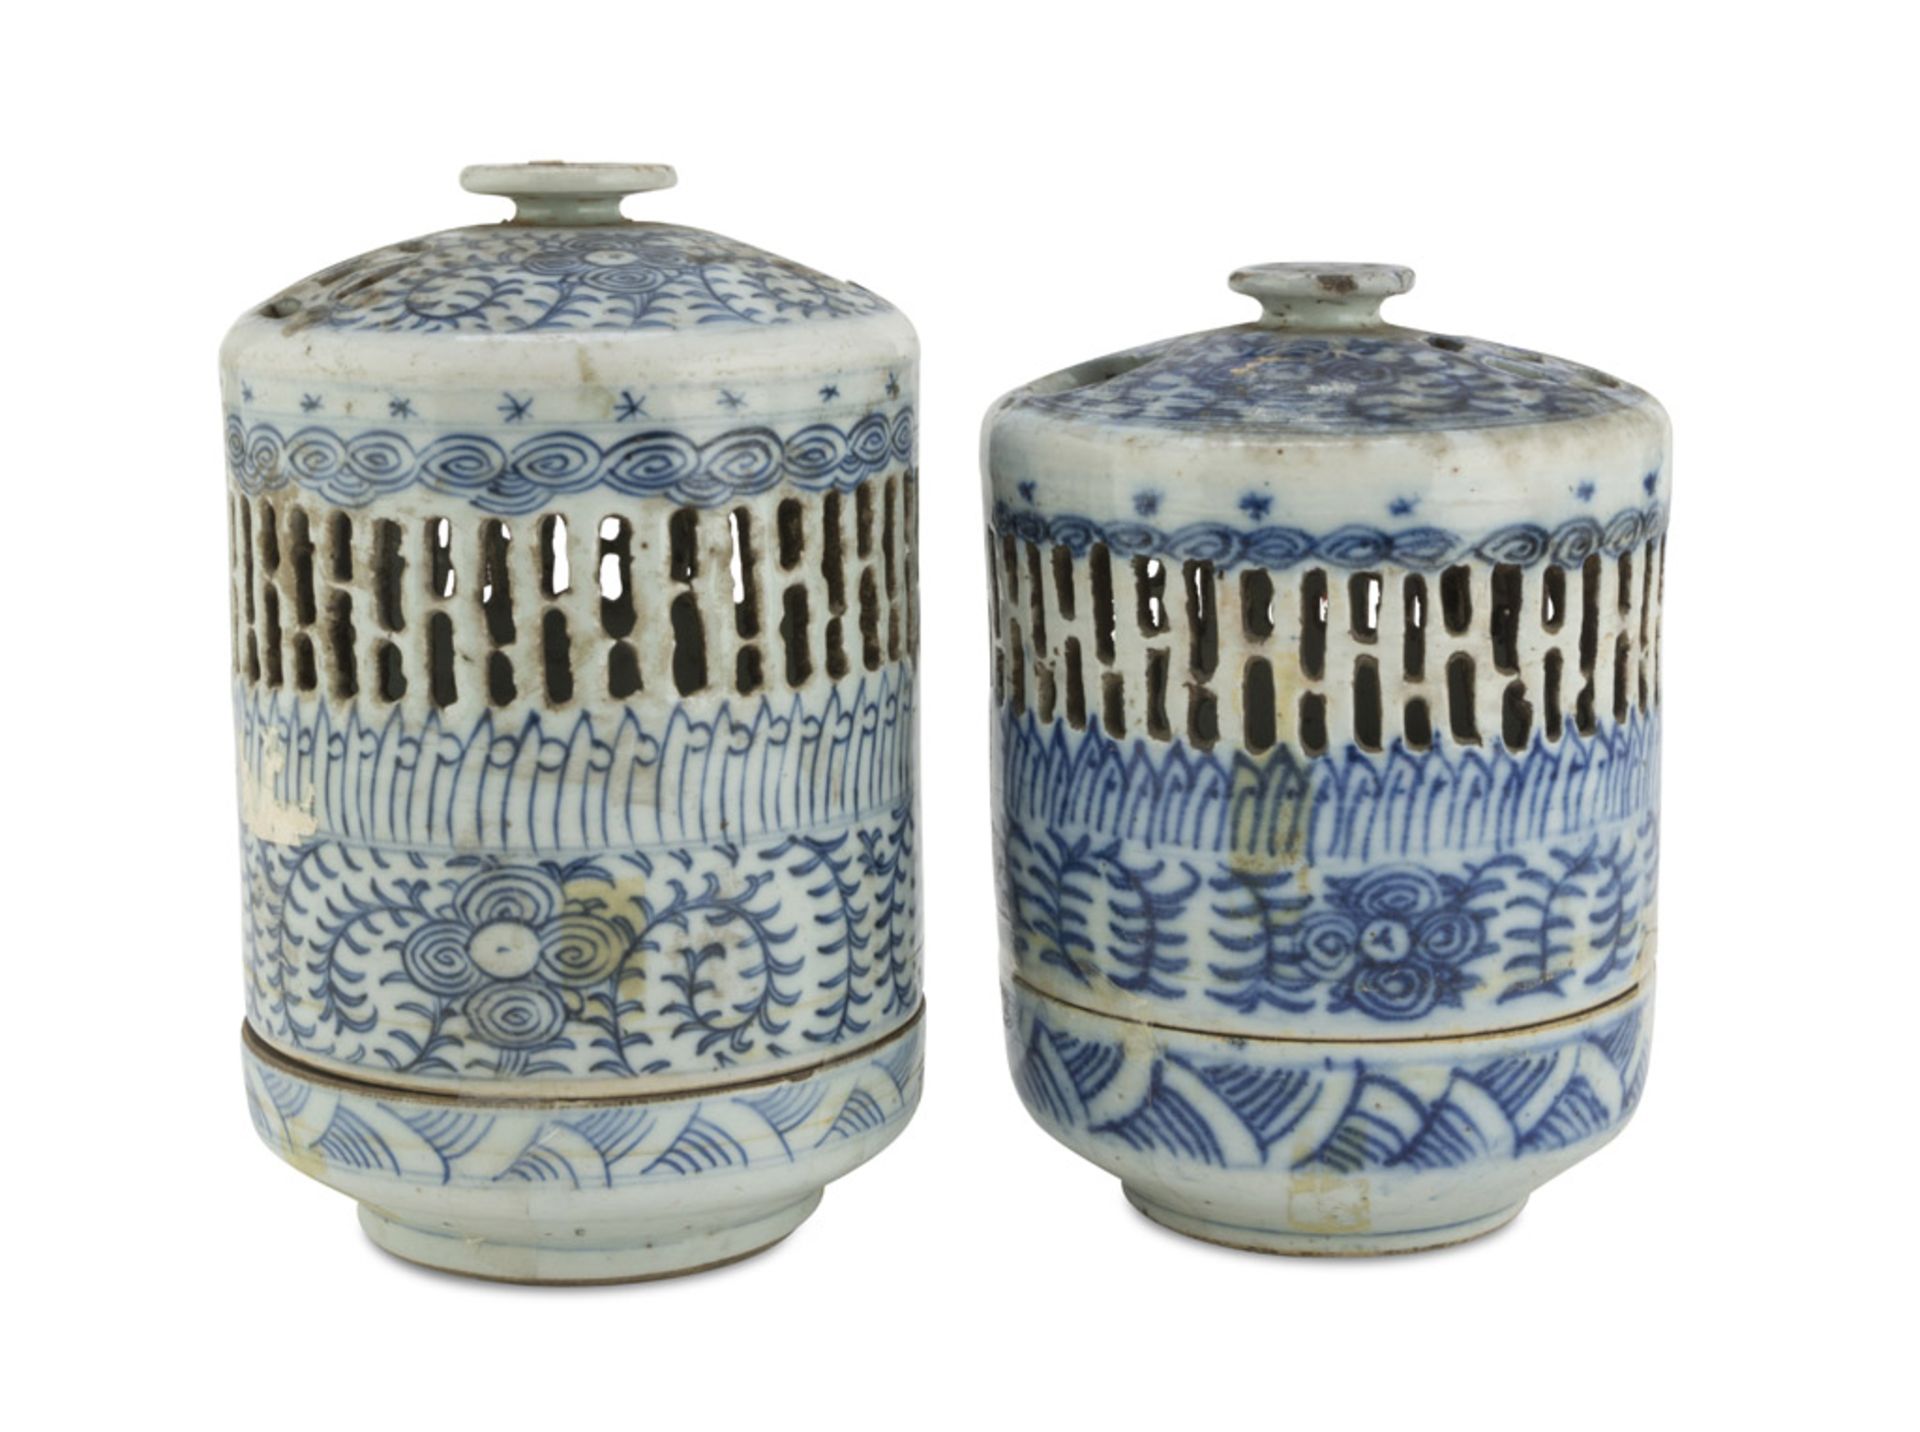 A PAIR OF CENSERS IN WHITE AND BLUE PORCELAIN, CHINA LATE 19TH, EARLY 20TH CENTURY decorated with